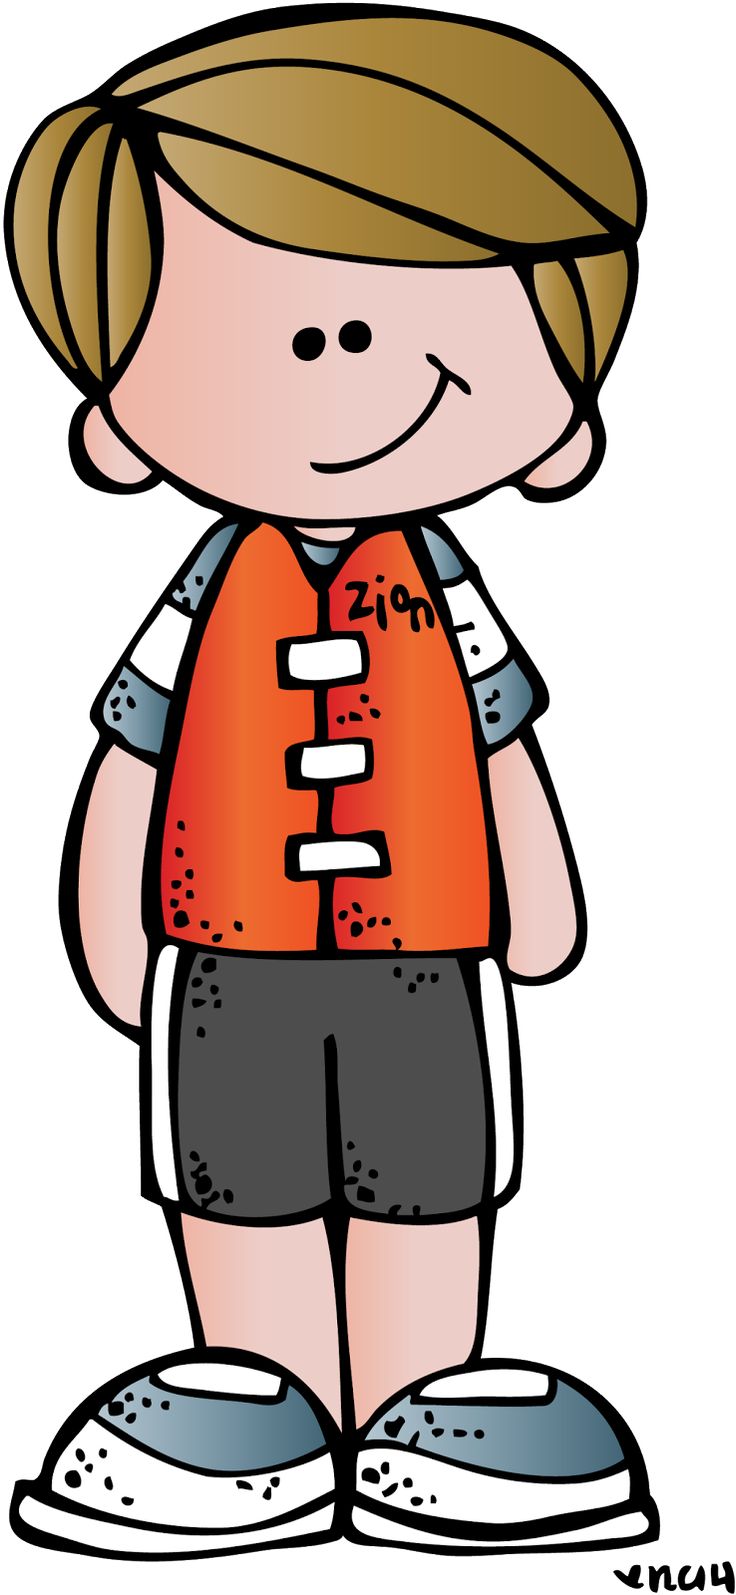 brother clipart student